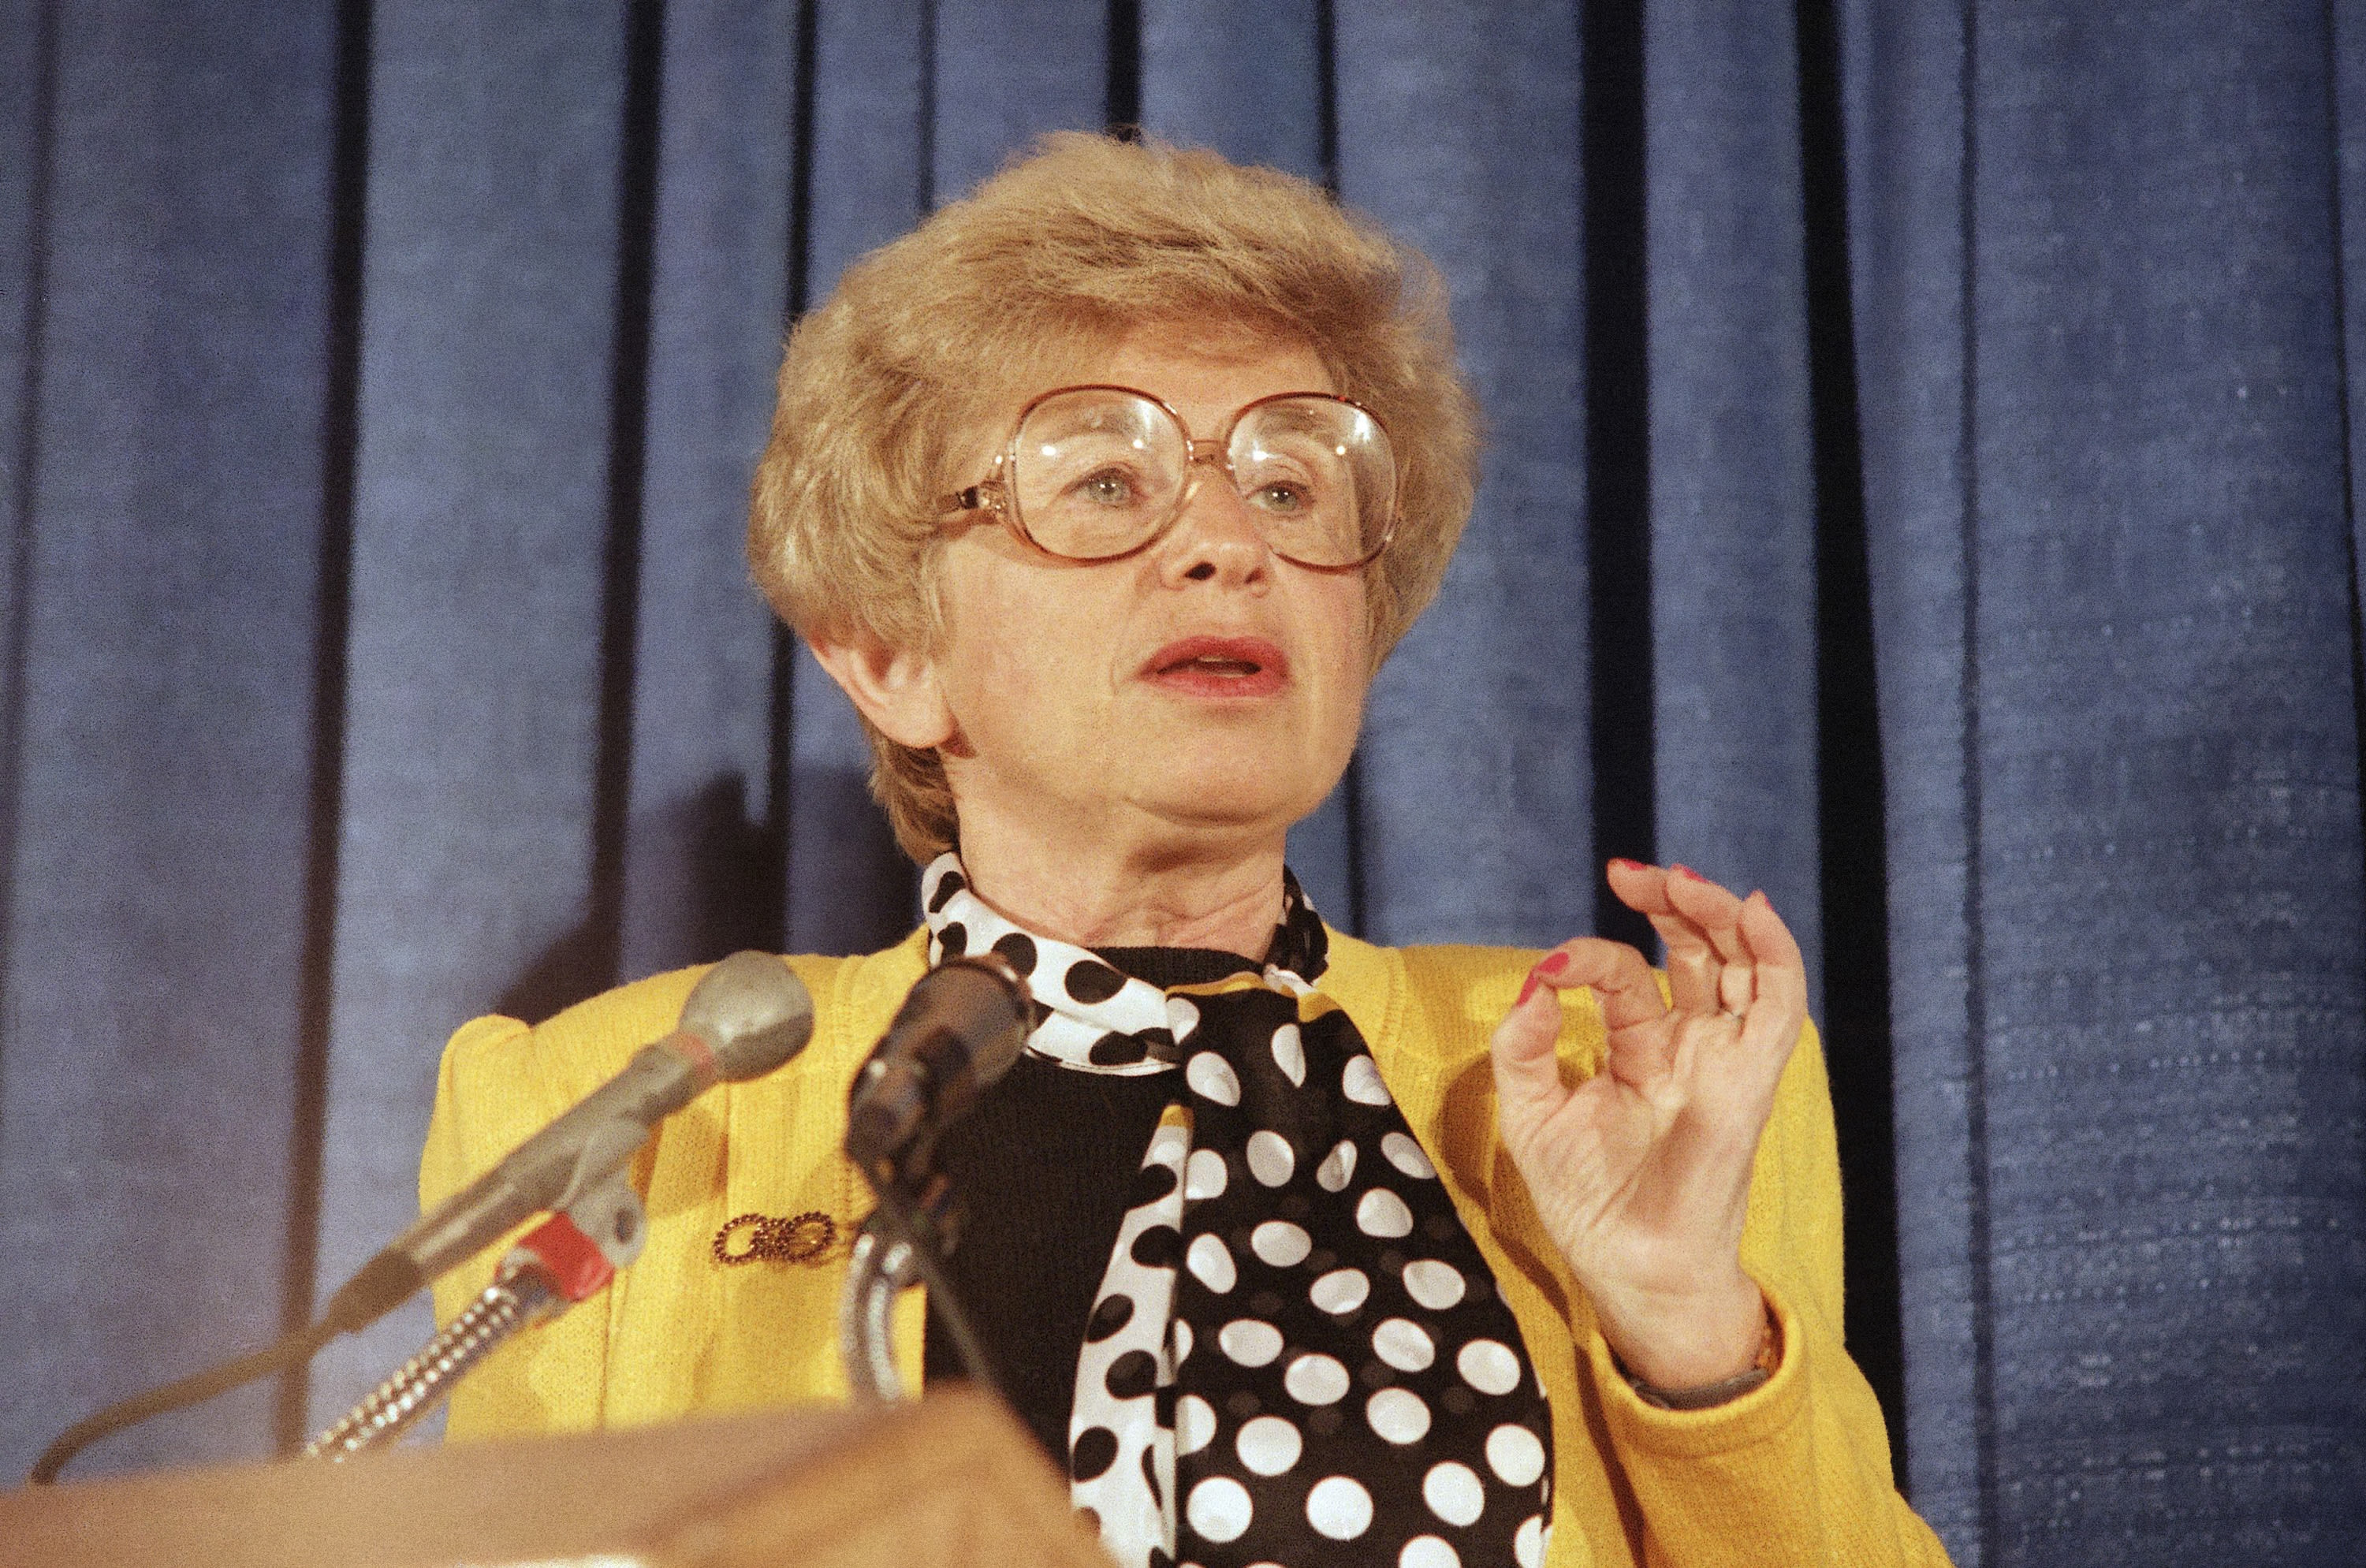 Perspective | Why millions trusted Dr. Ruth for the most intimate advice